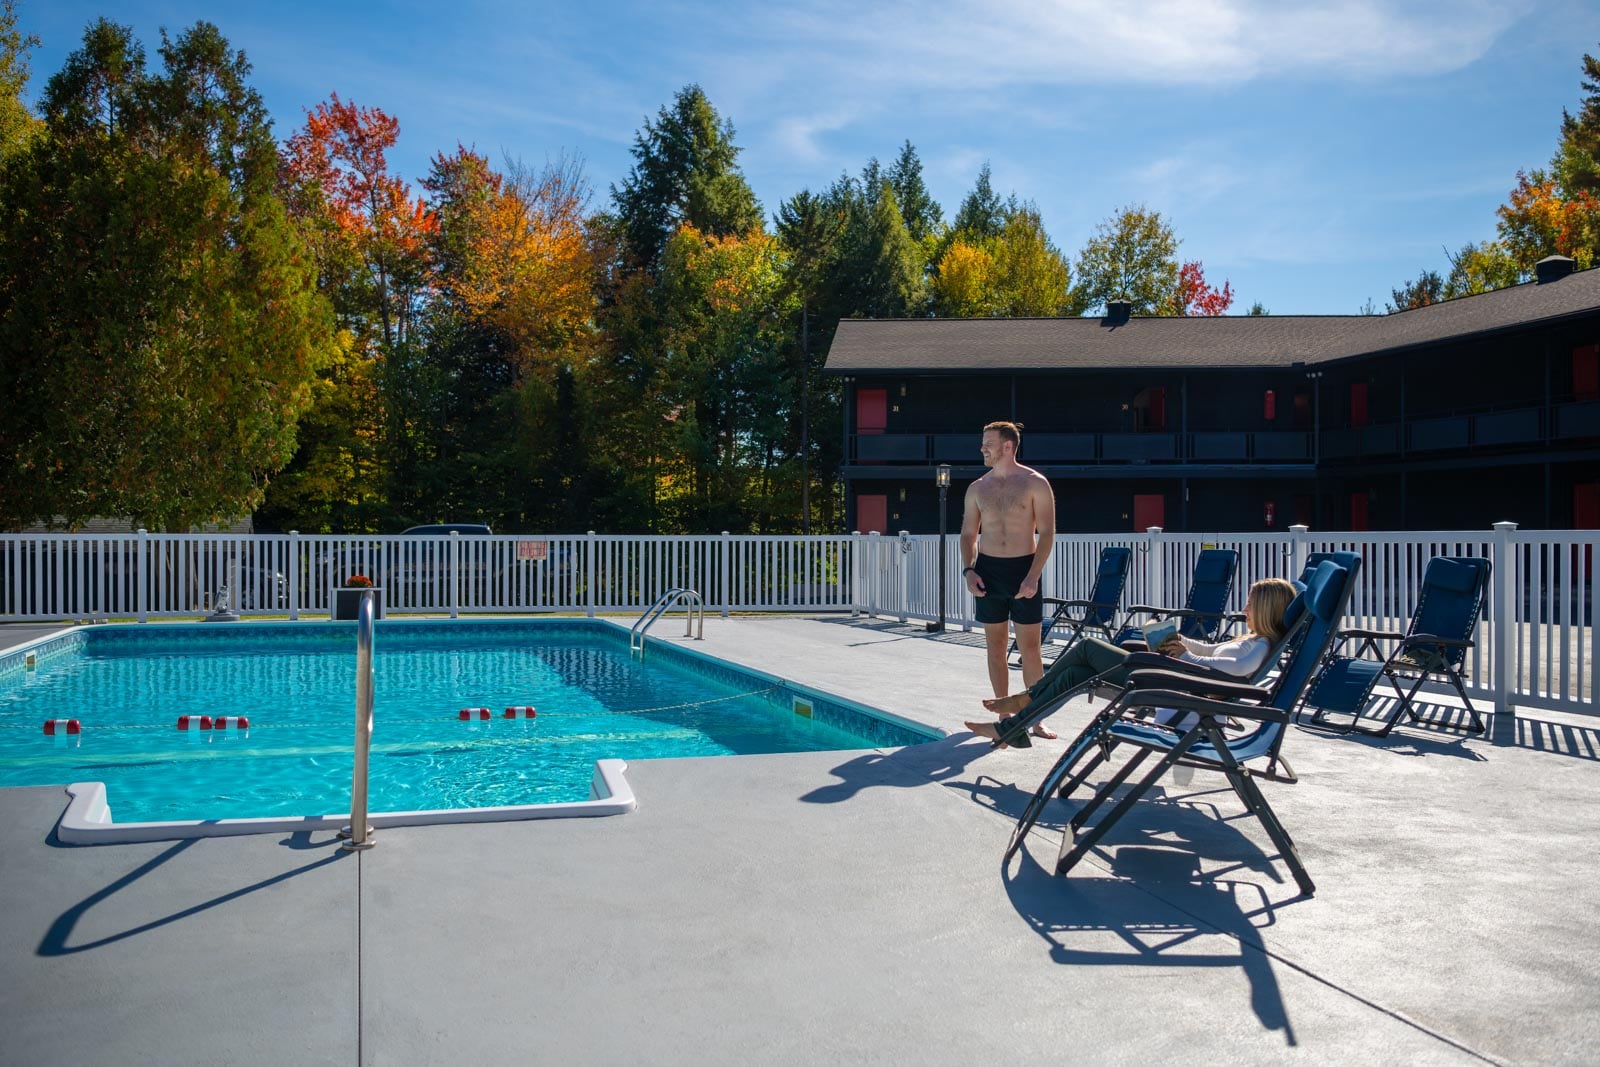 A man is sitting in a lounge chair next to a swimming pool.